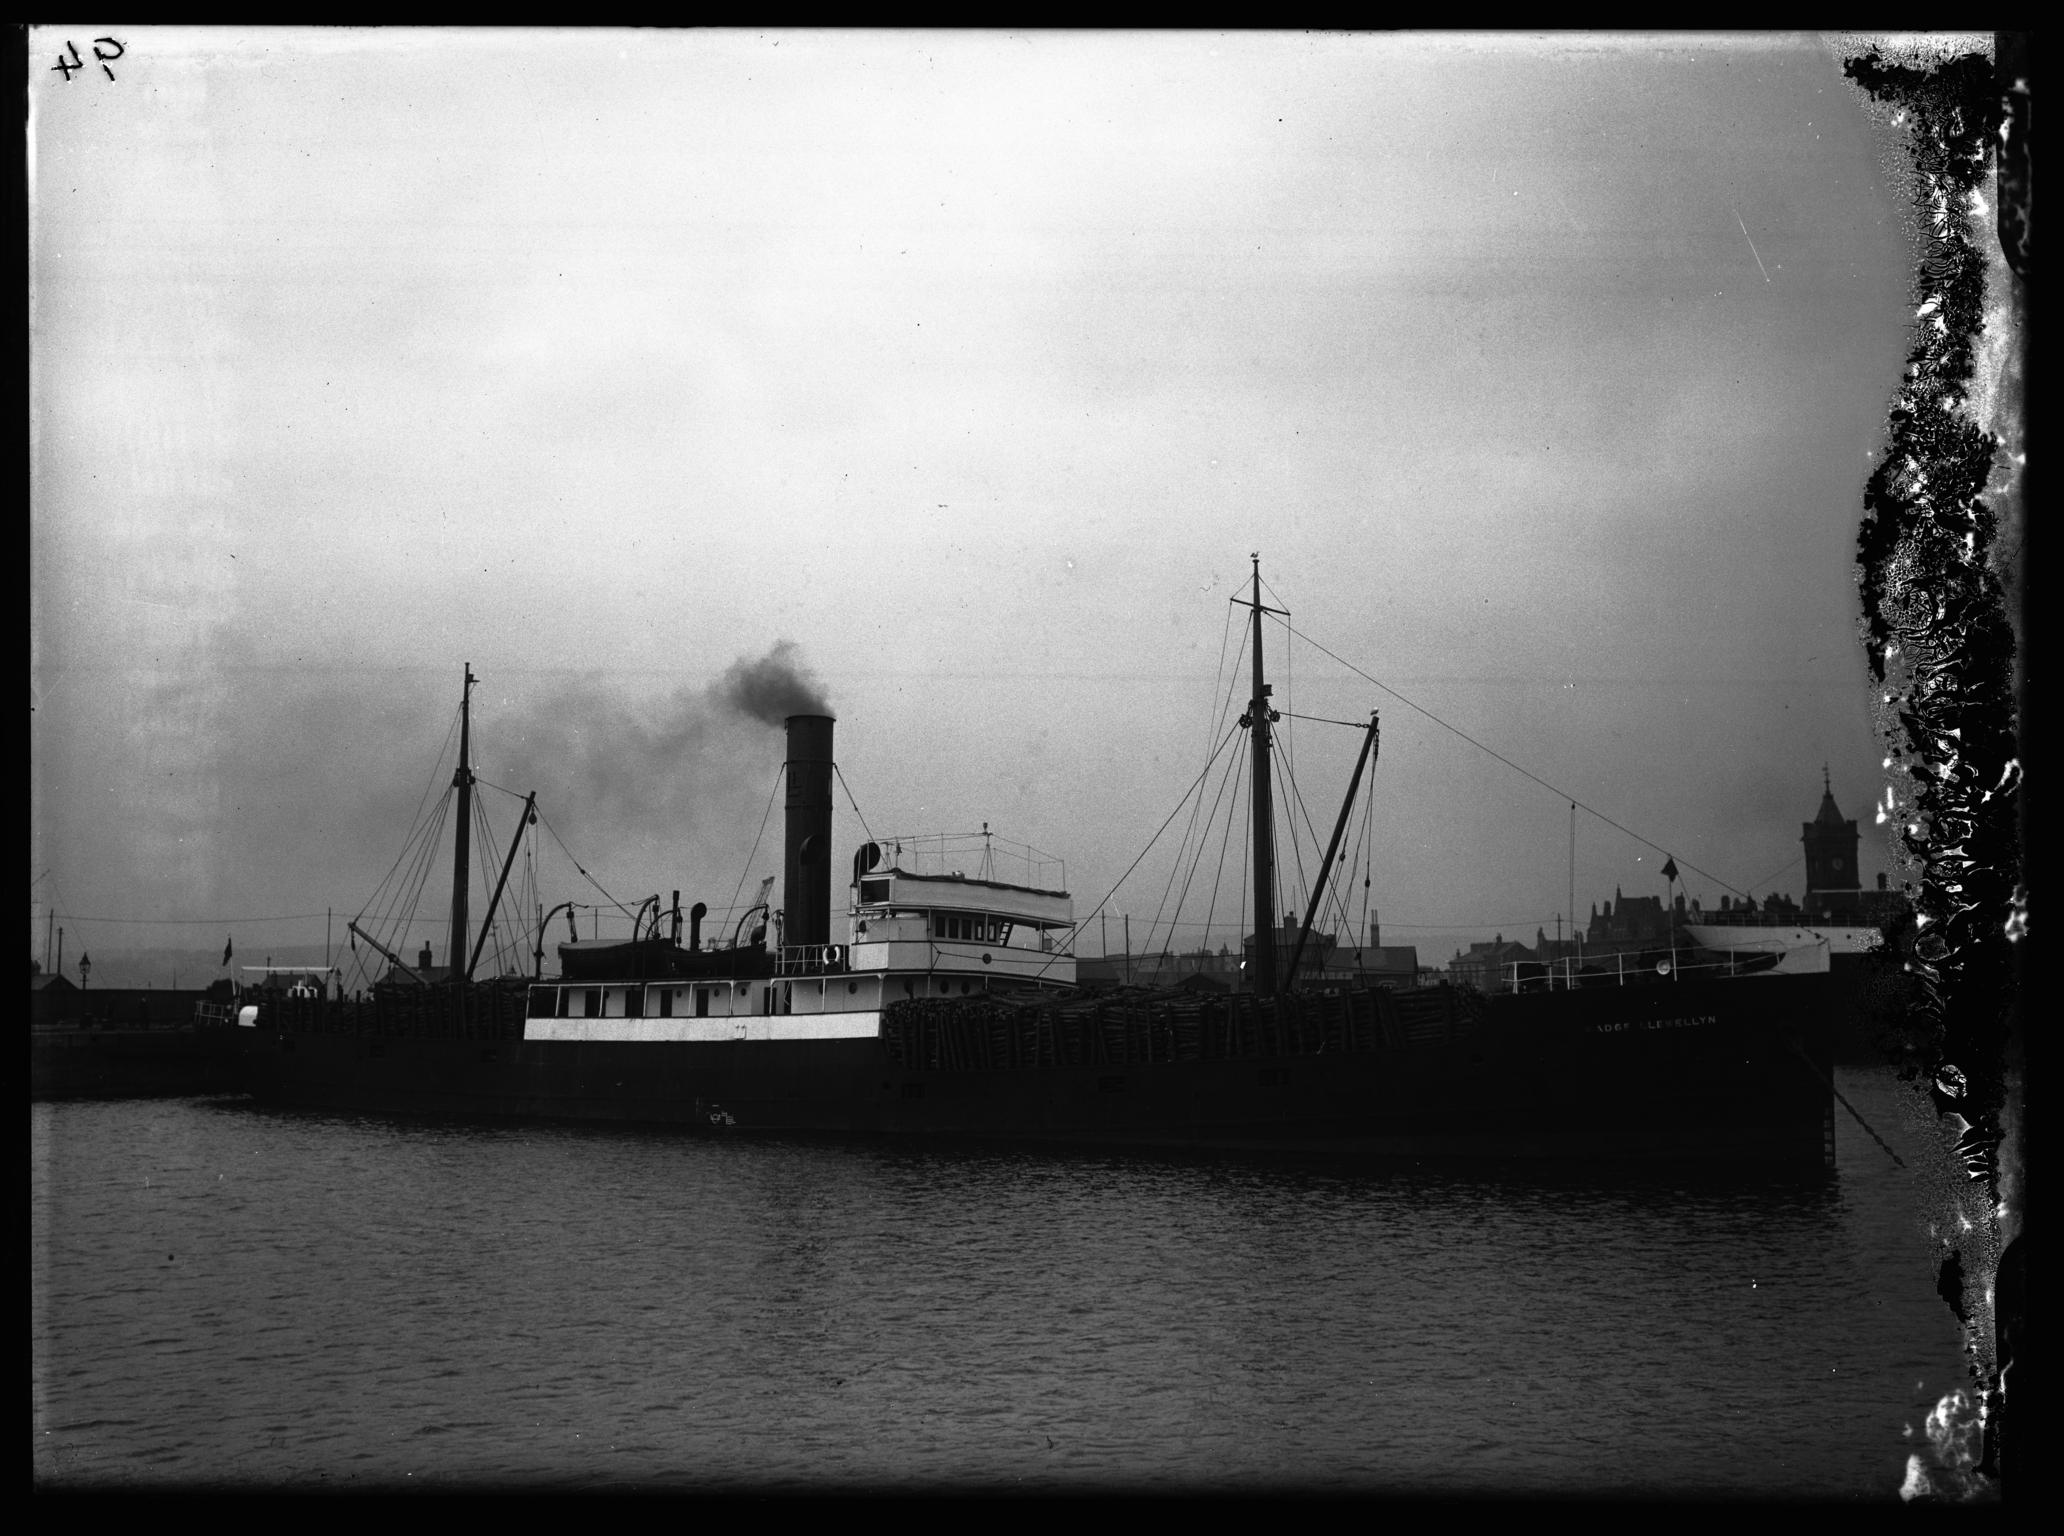 S.S. MADGE LLEWELLYN, glass negative